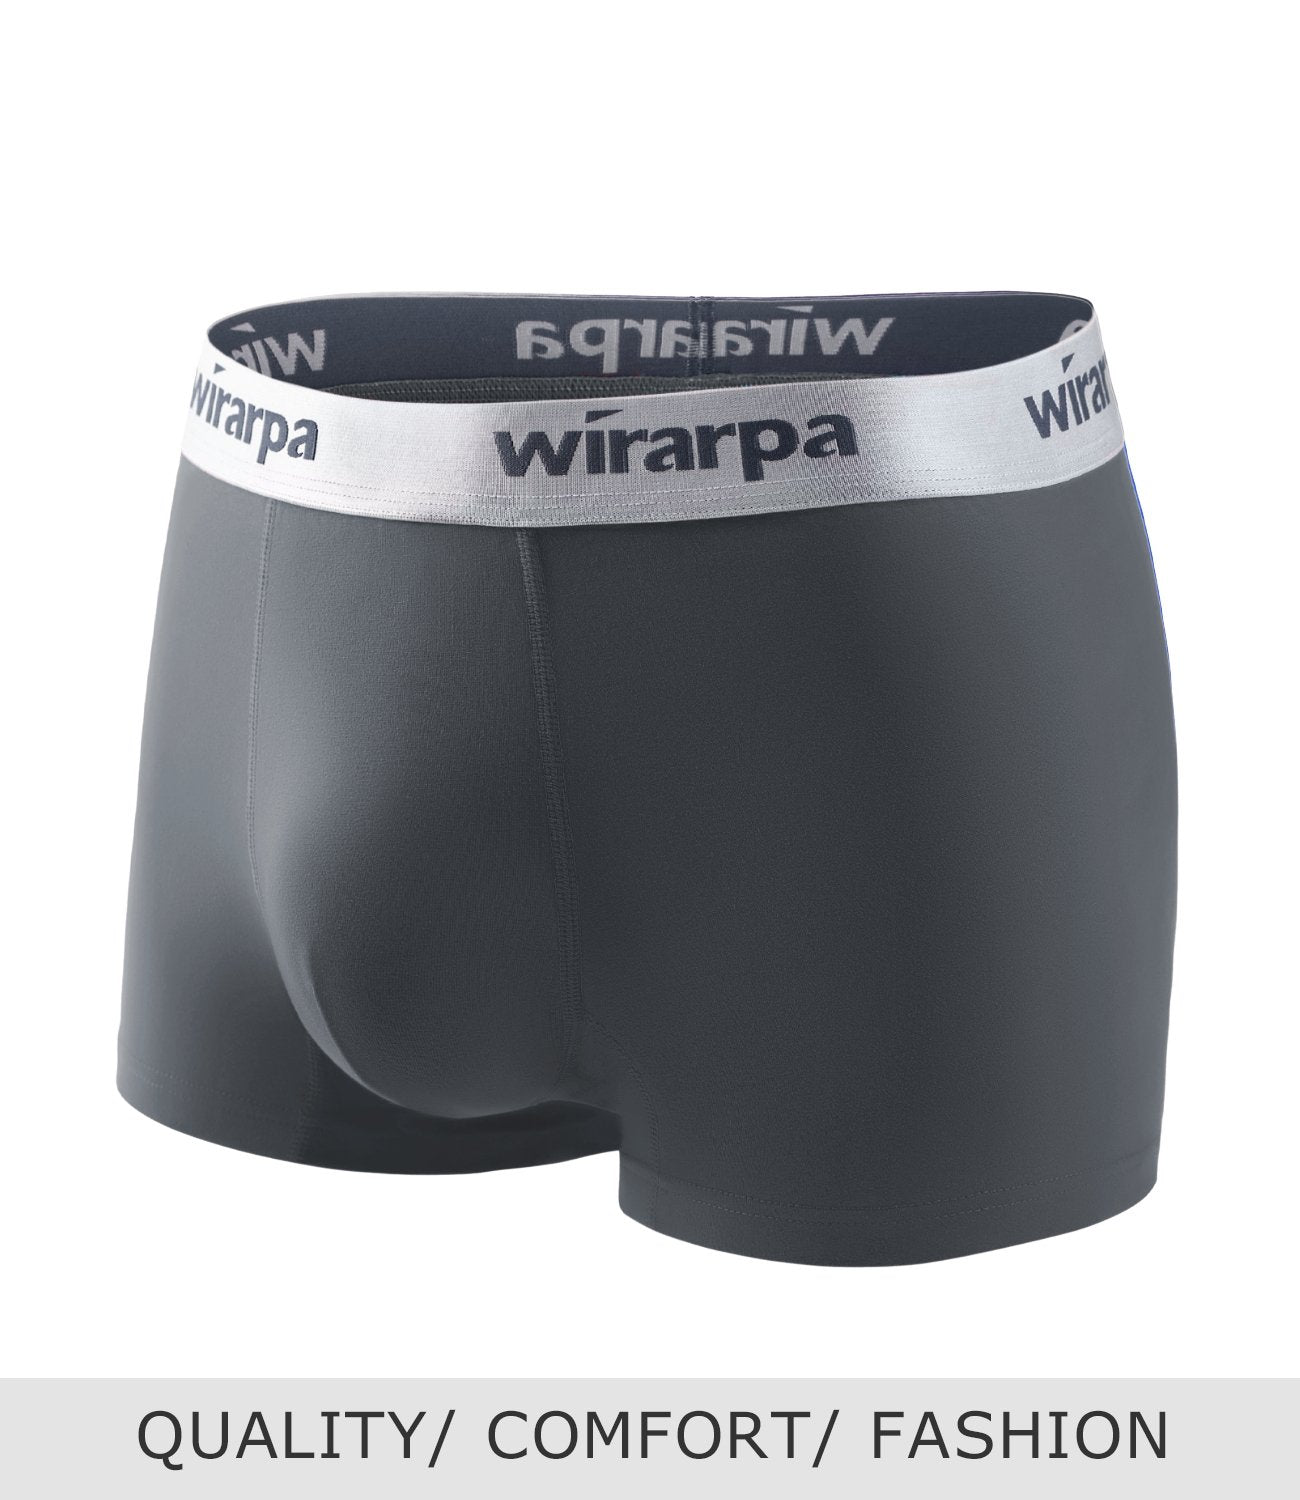 wirarpa Men's Tagless Cotton Stretch Trunks with Wide Waistband 4